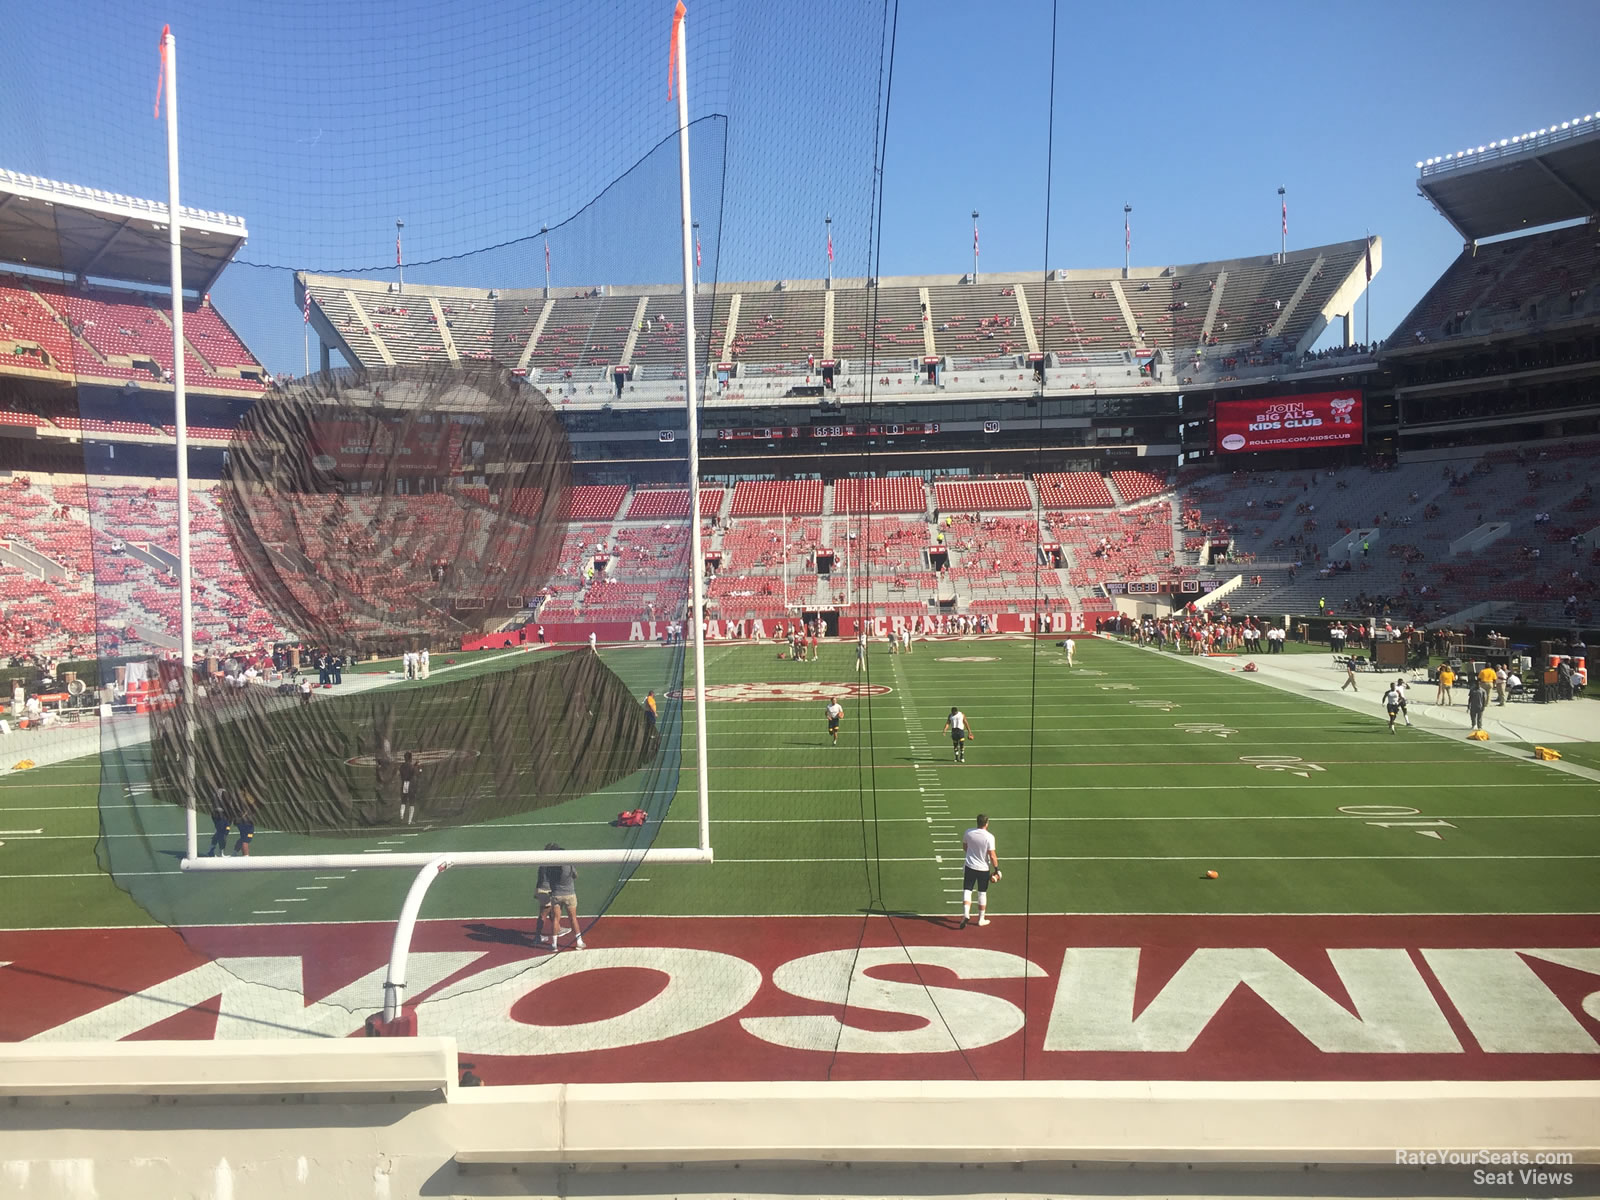 section s5, row 20 seat view  - bryant-denny stadium